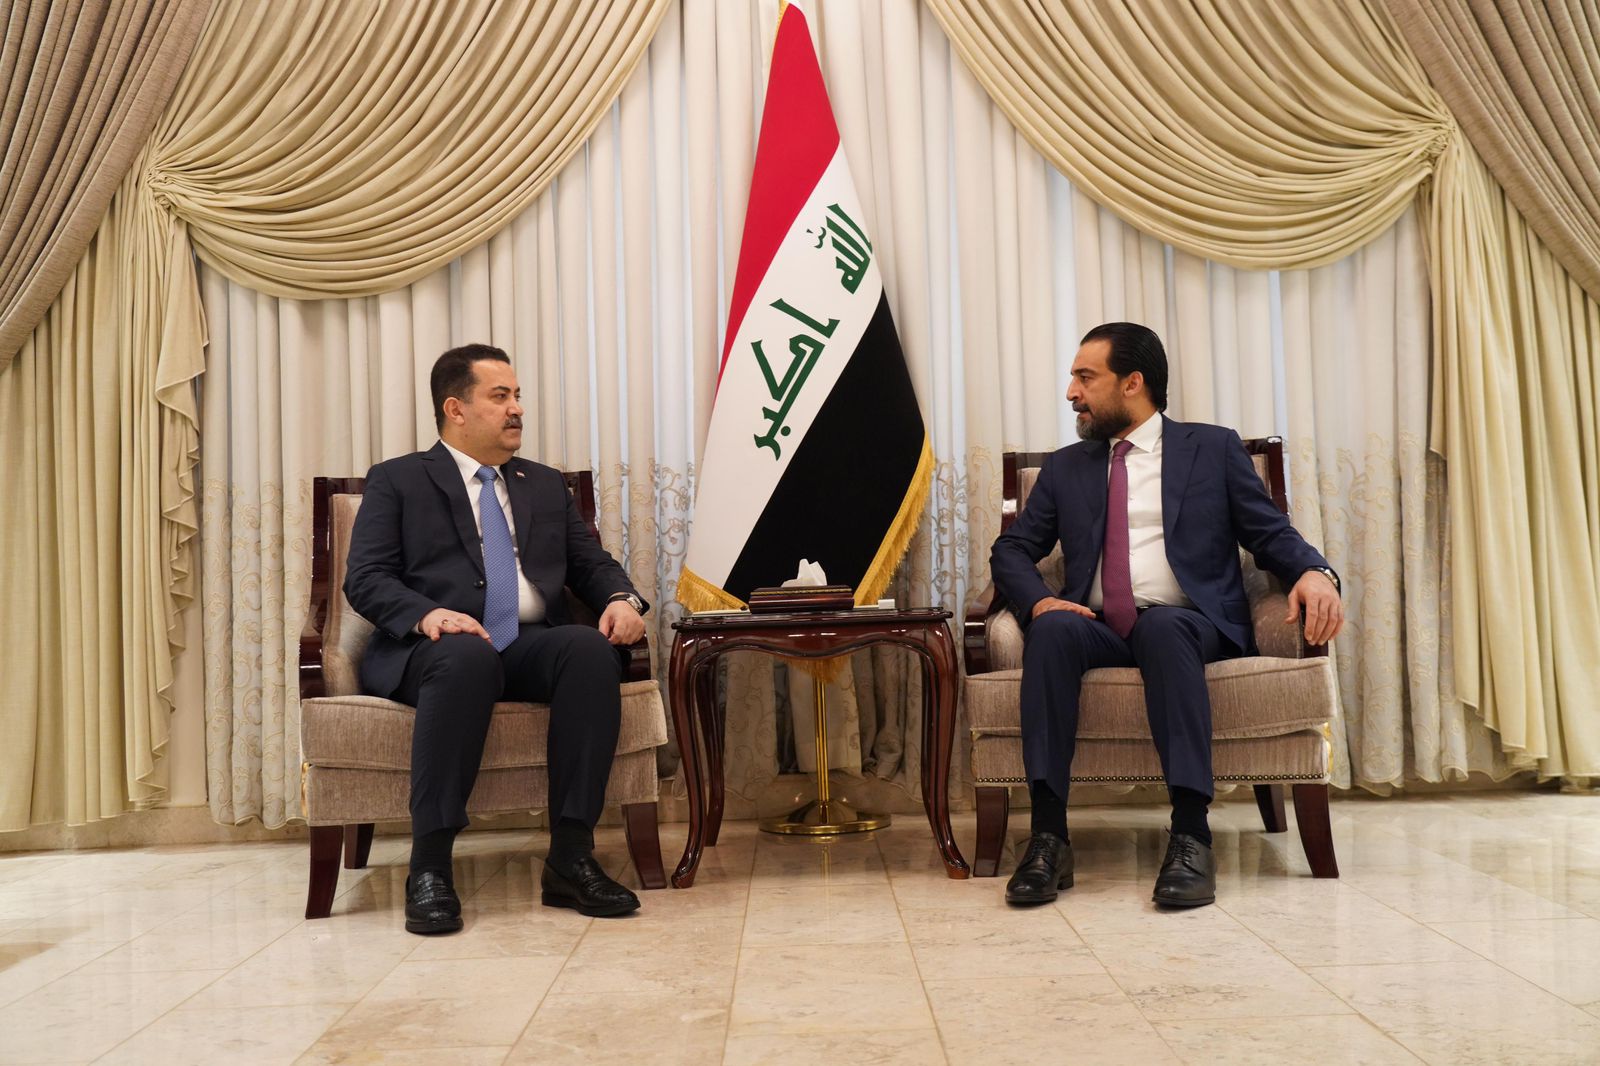 Iraqi Prime Minister meets deposed Parliament Speaker to discuss political developments